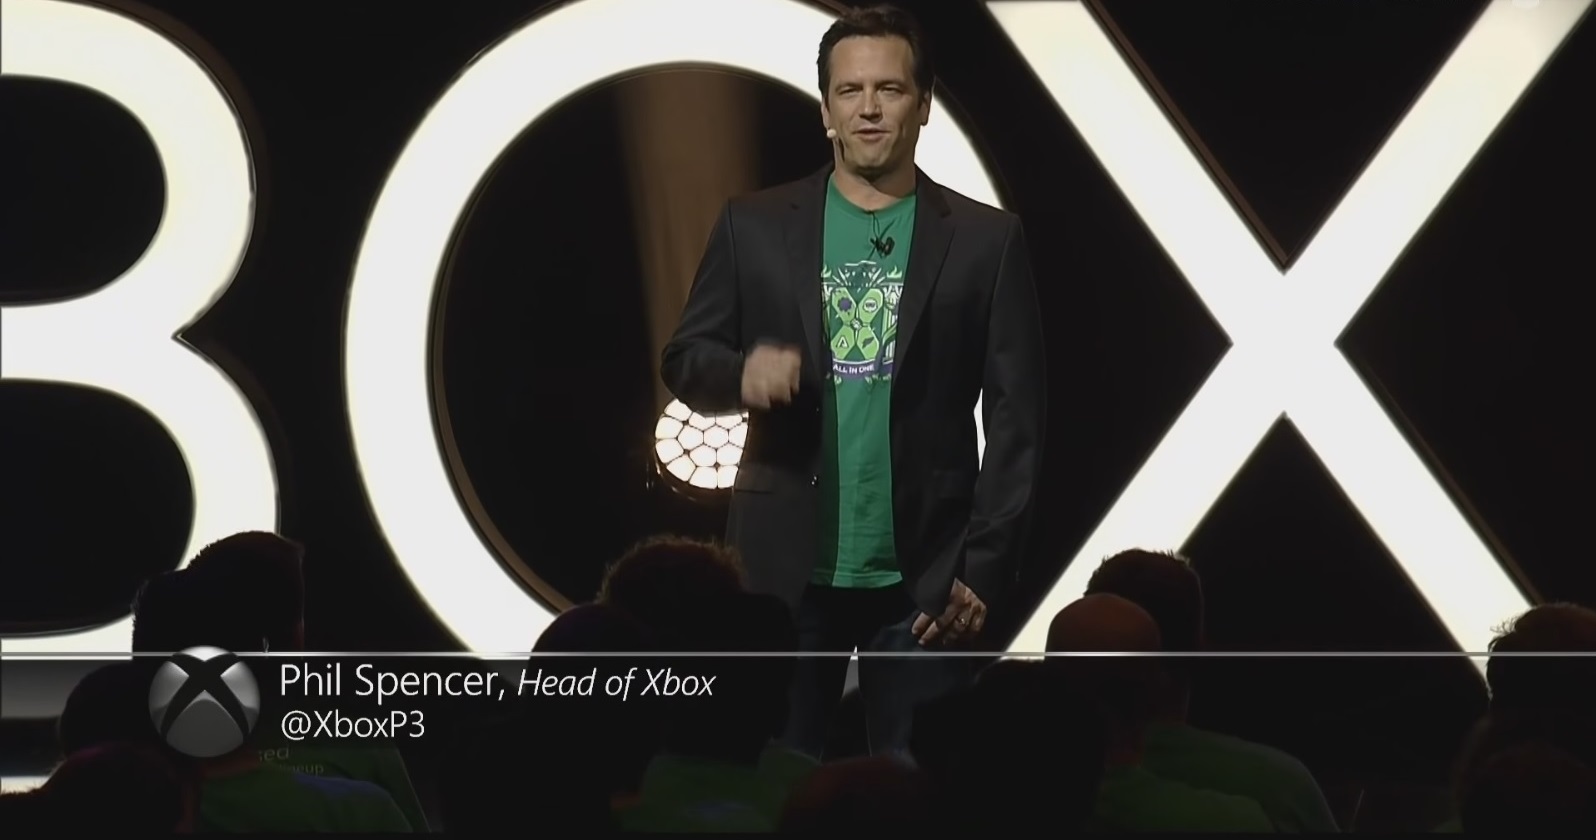 Microsoft's Phil Spencer would be happy to see Nintendo titles on Xbox